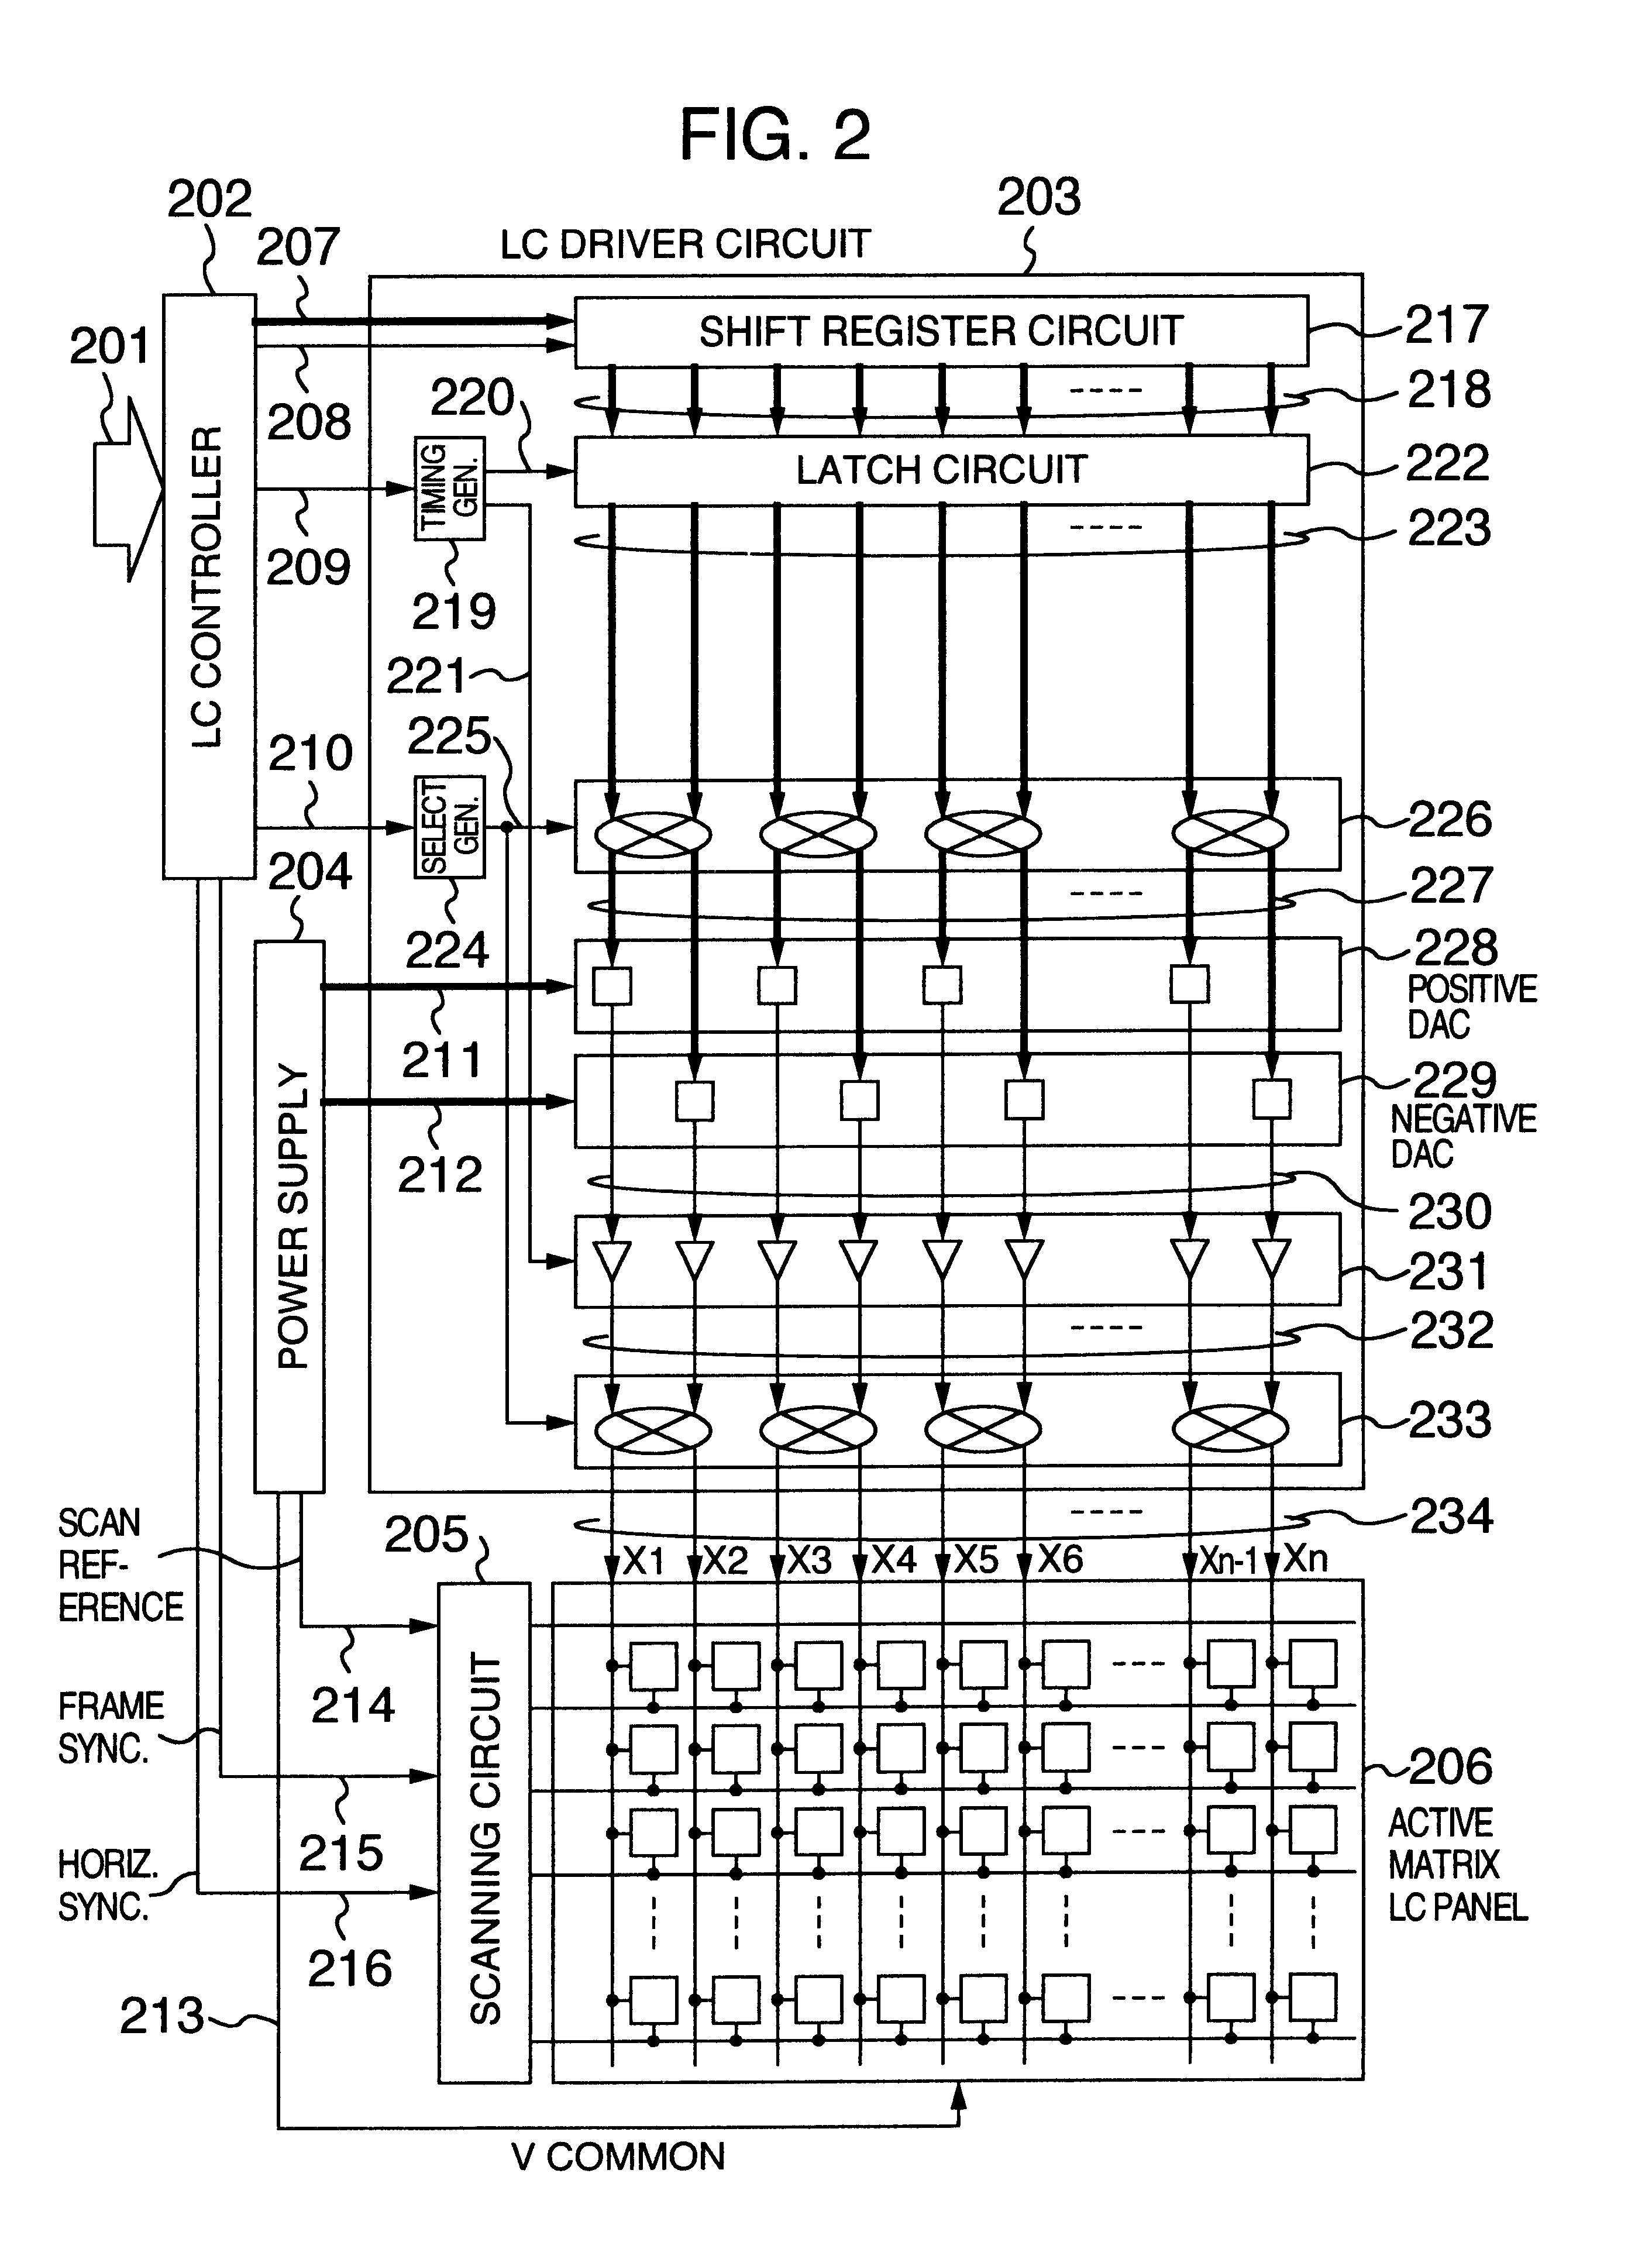 Liquid crystal driver circuit and LCD having fast data write capability